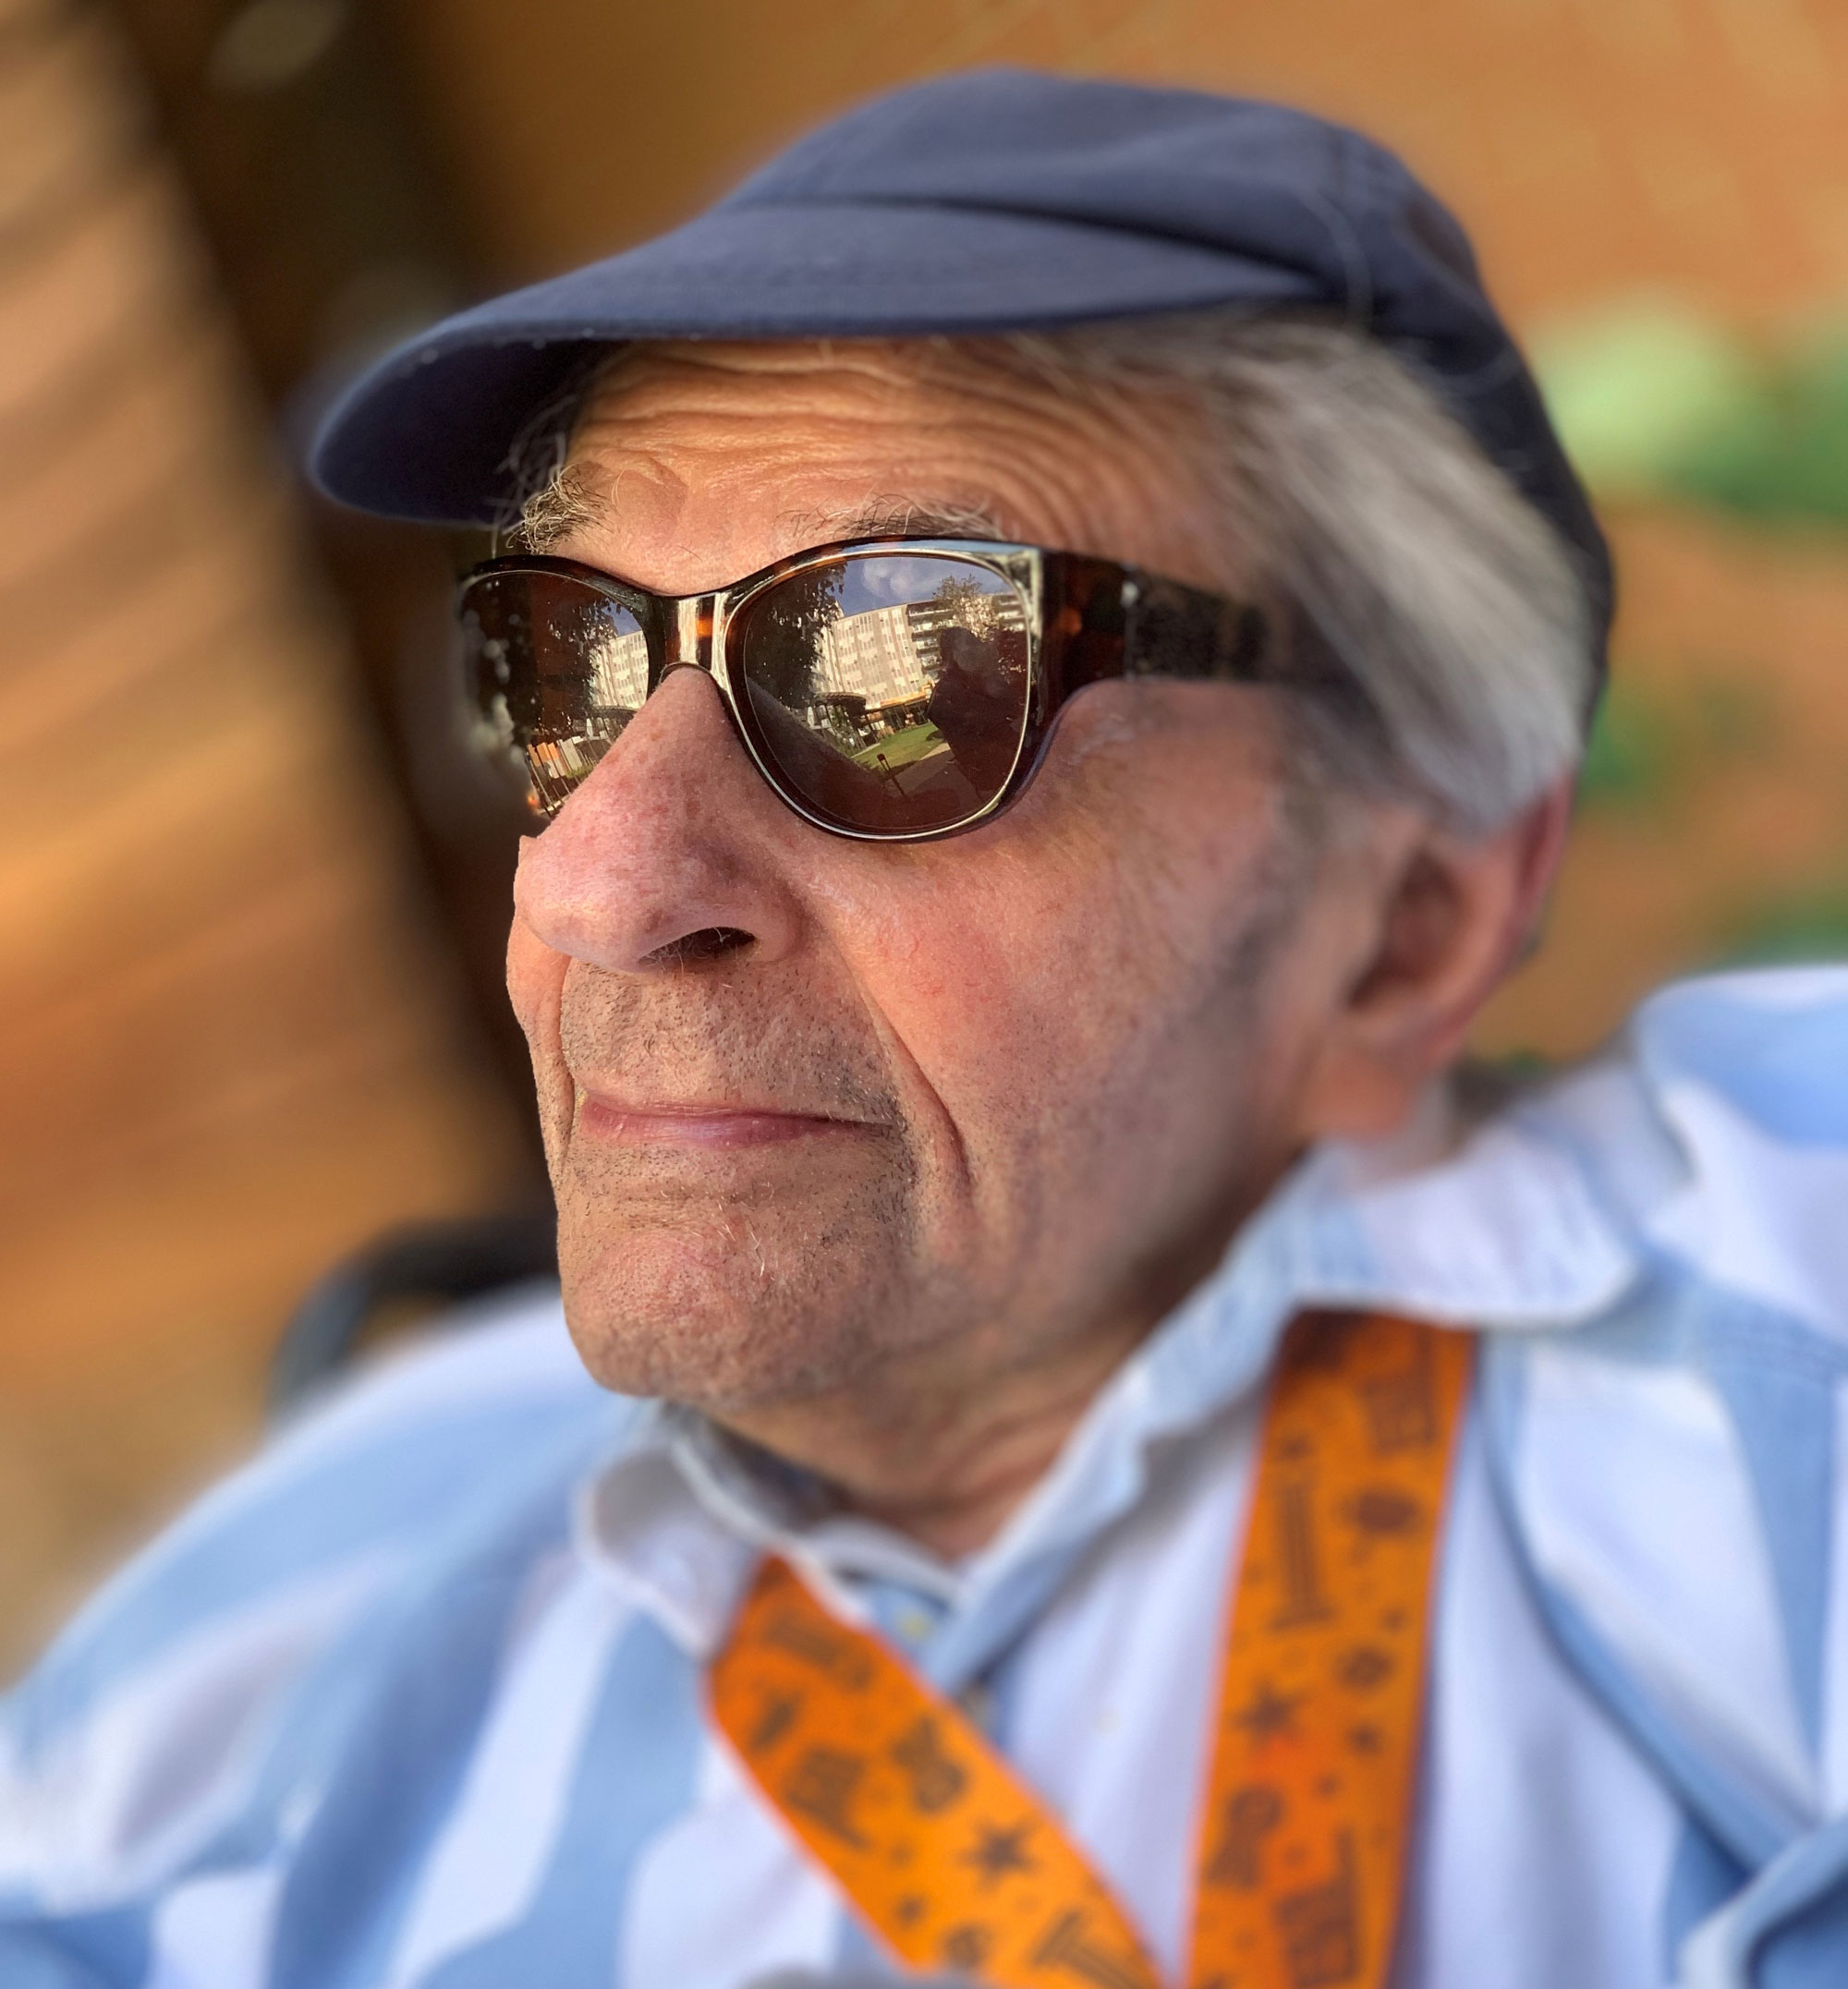 A man wearing sunglasses, a blue hat and a blue shirt looking off into the distance.